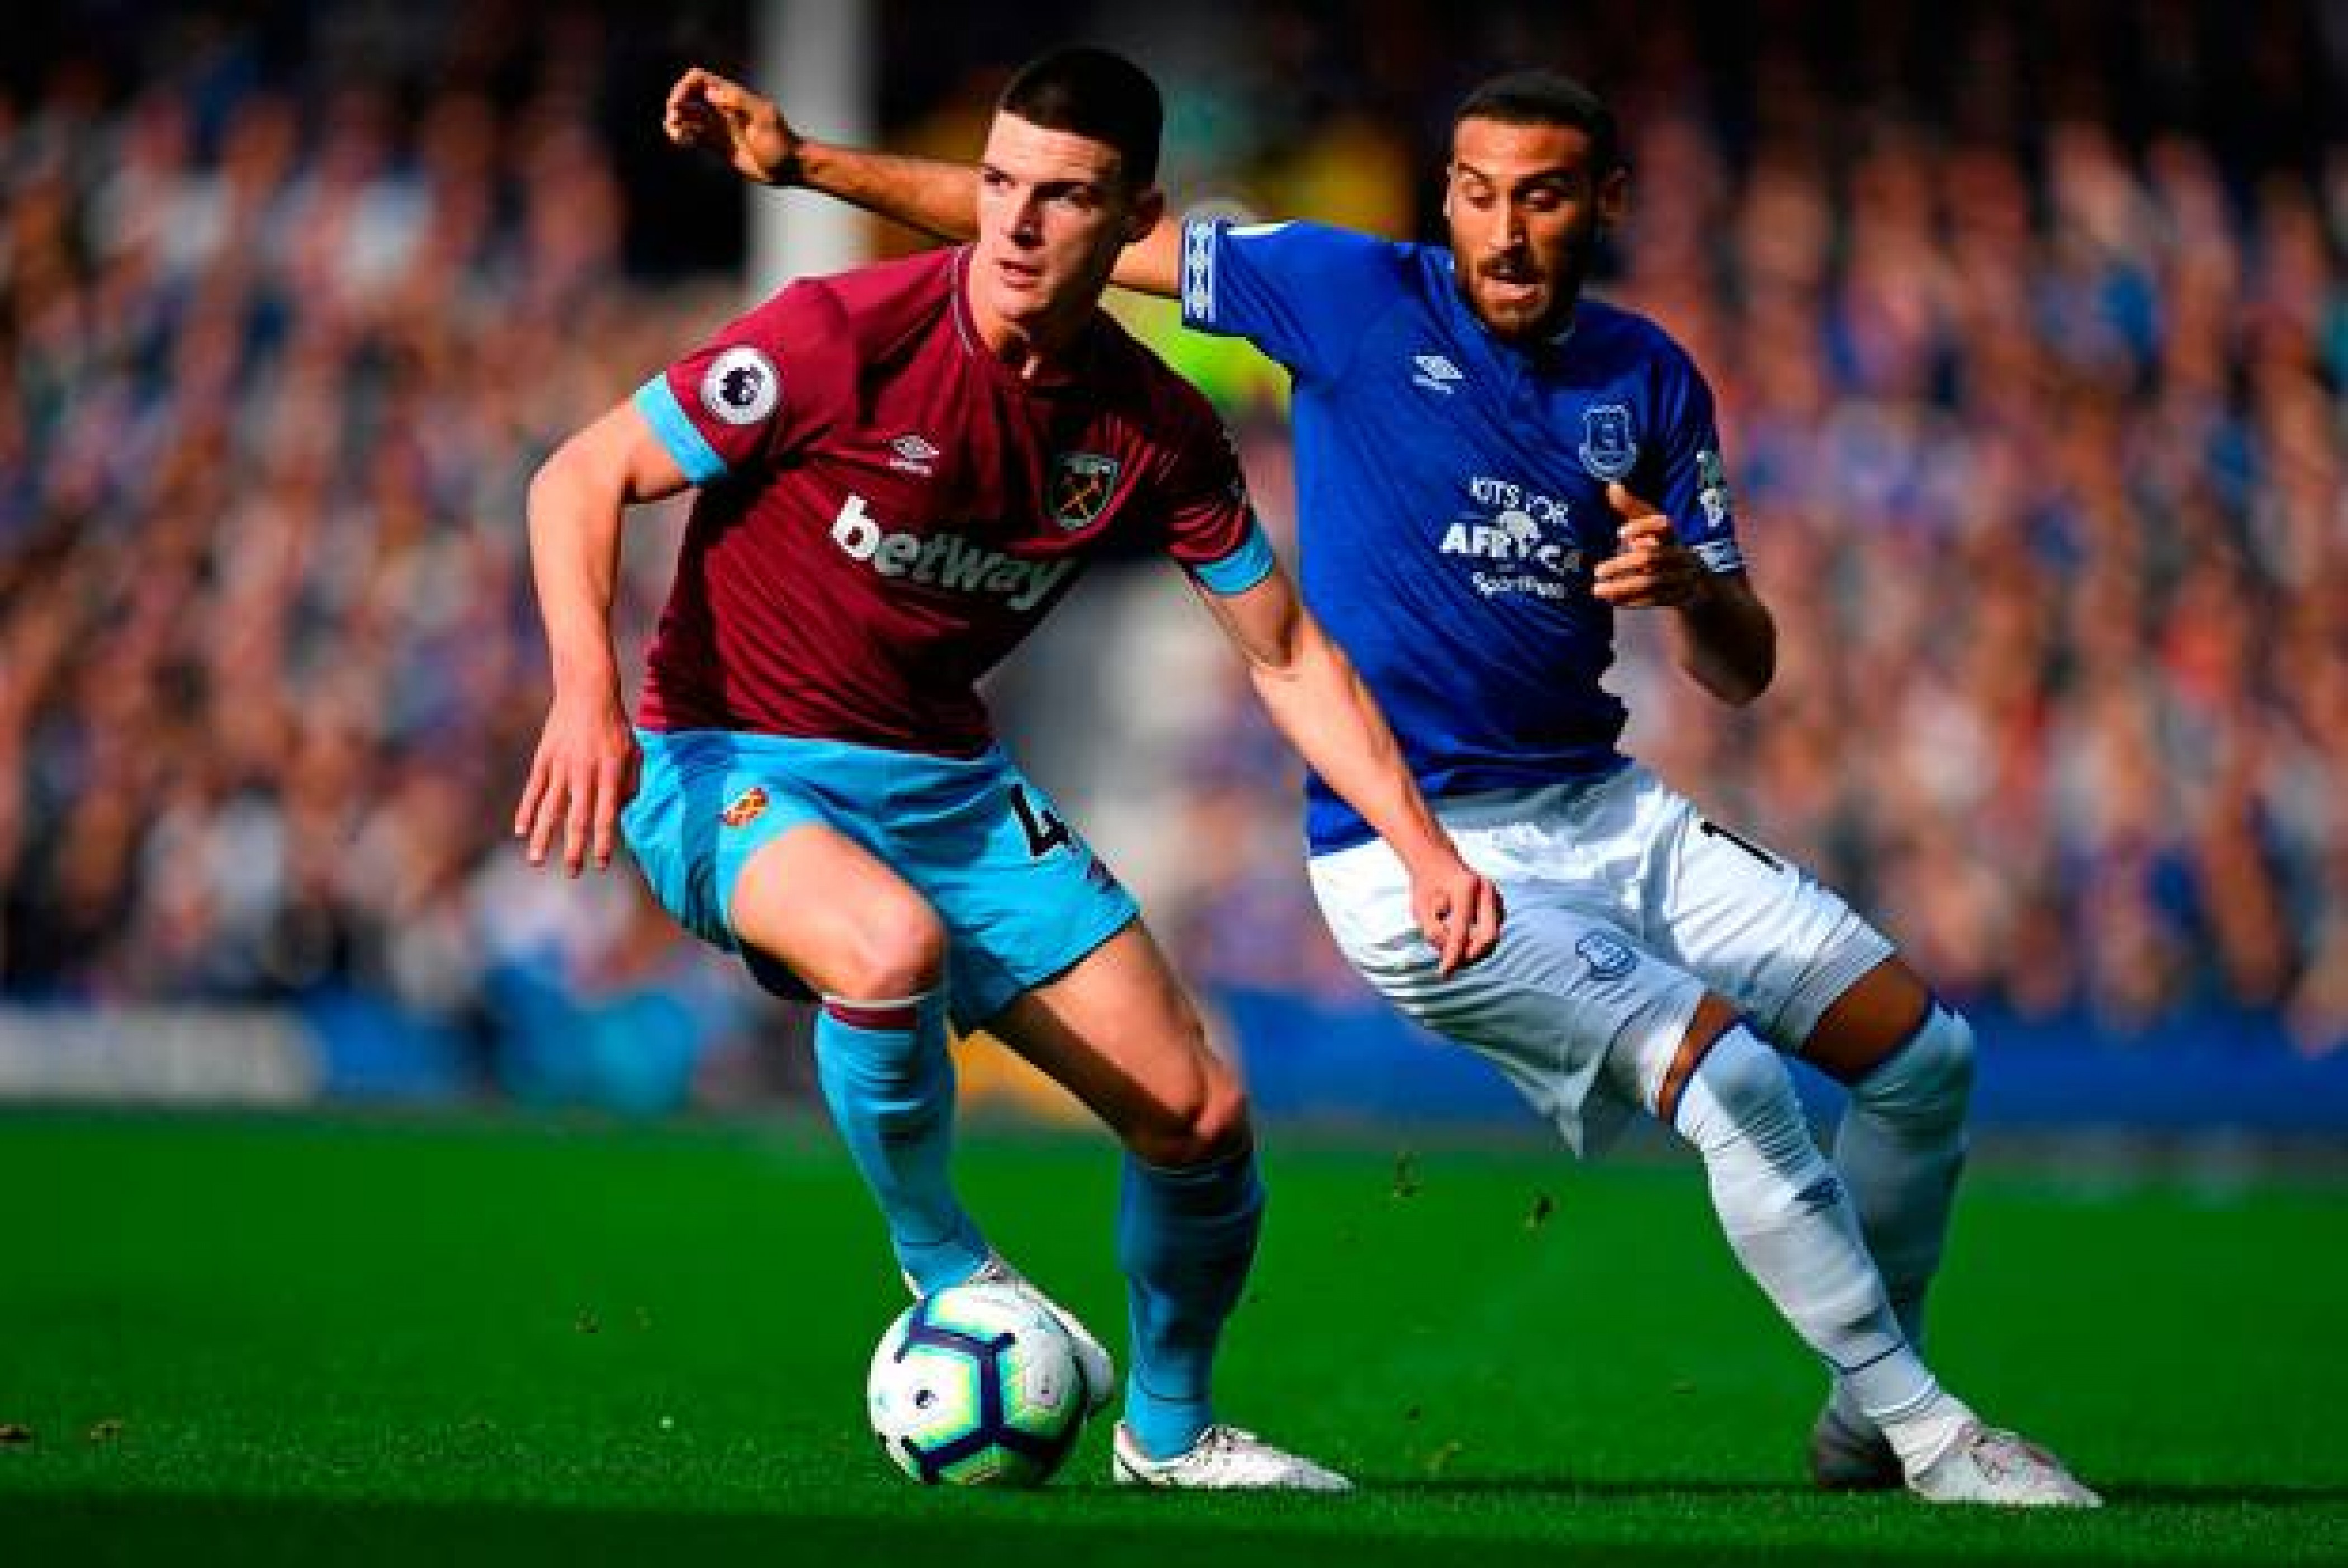 Declan Rice praises his teams near perfect performance in 3-1 win against Everton.